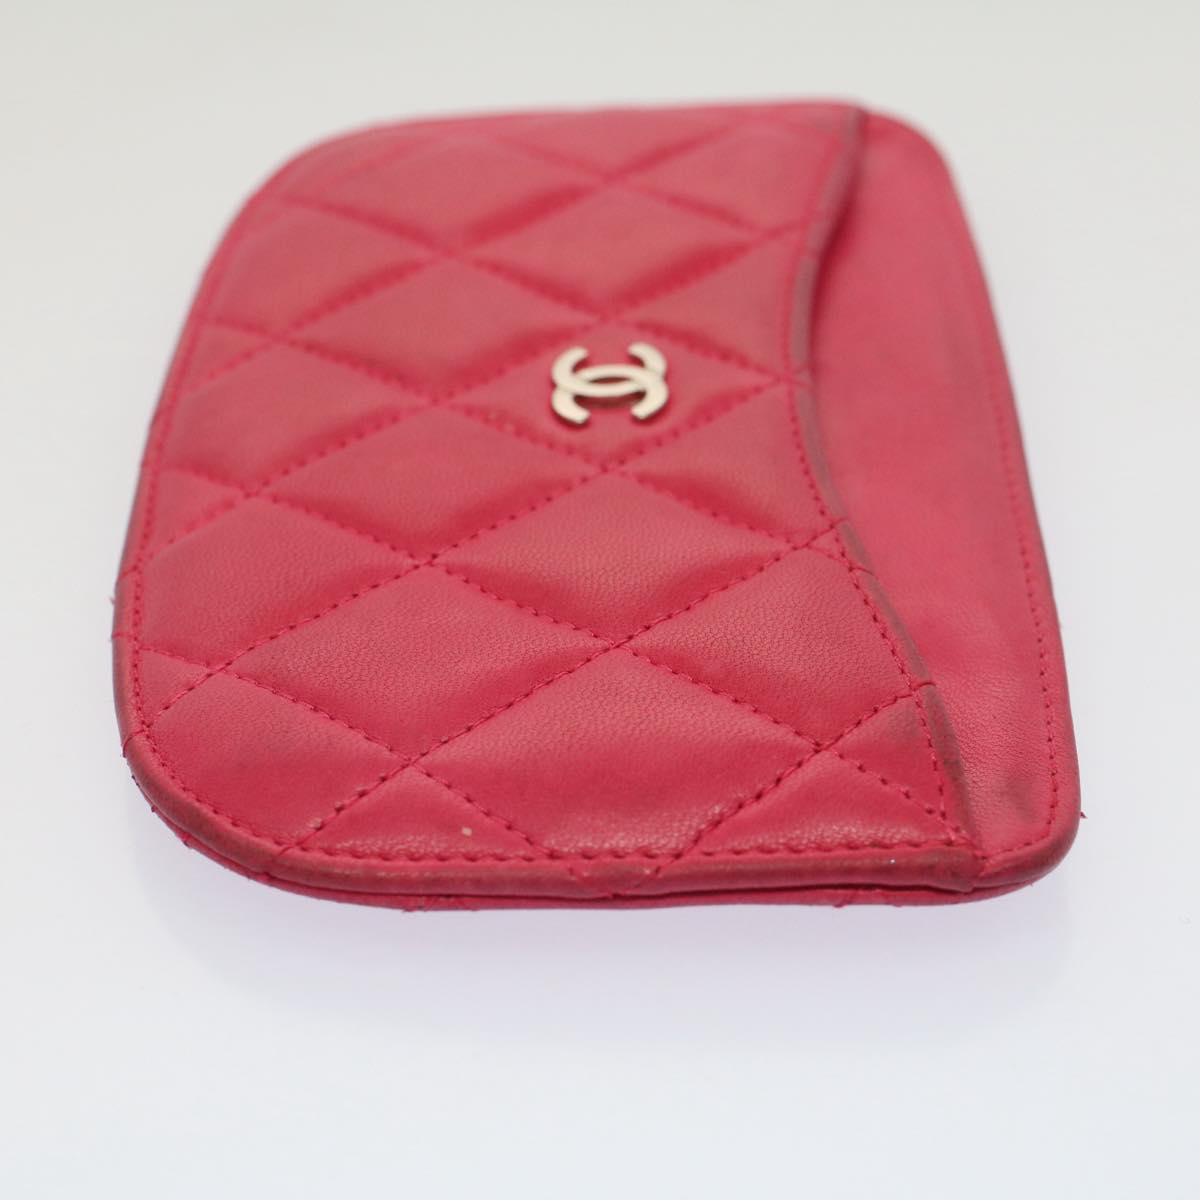 CHANEL Pouch Lamb Skin Pink CC Auth bs8239